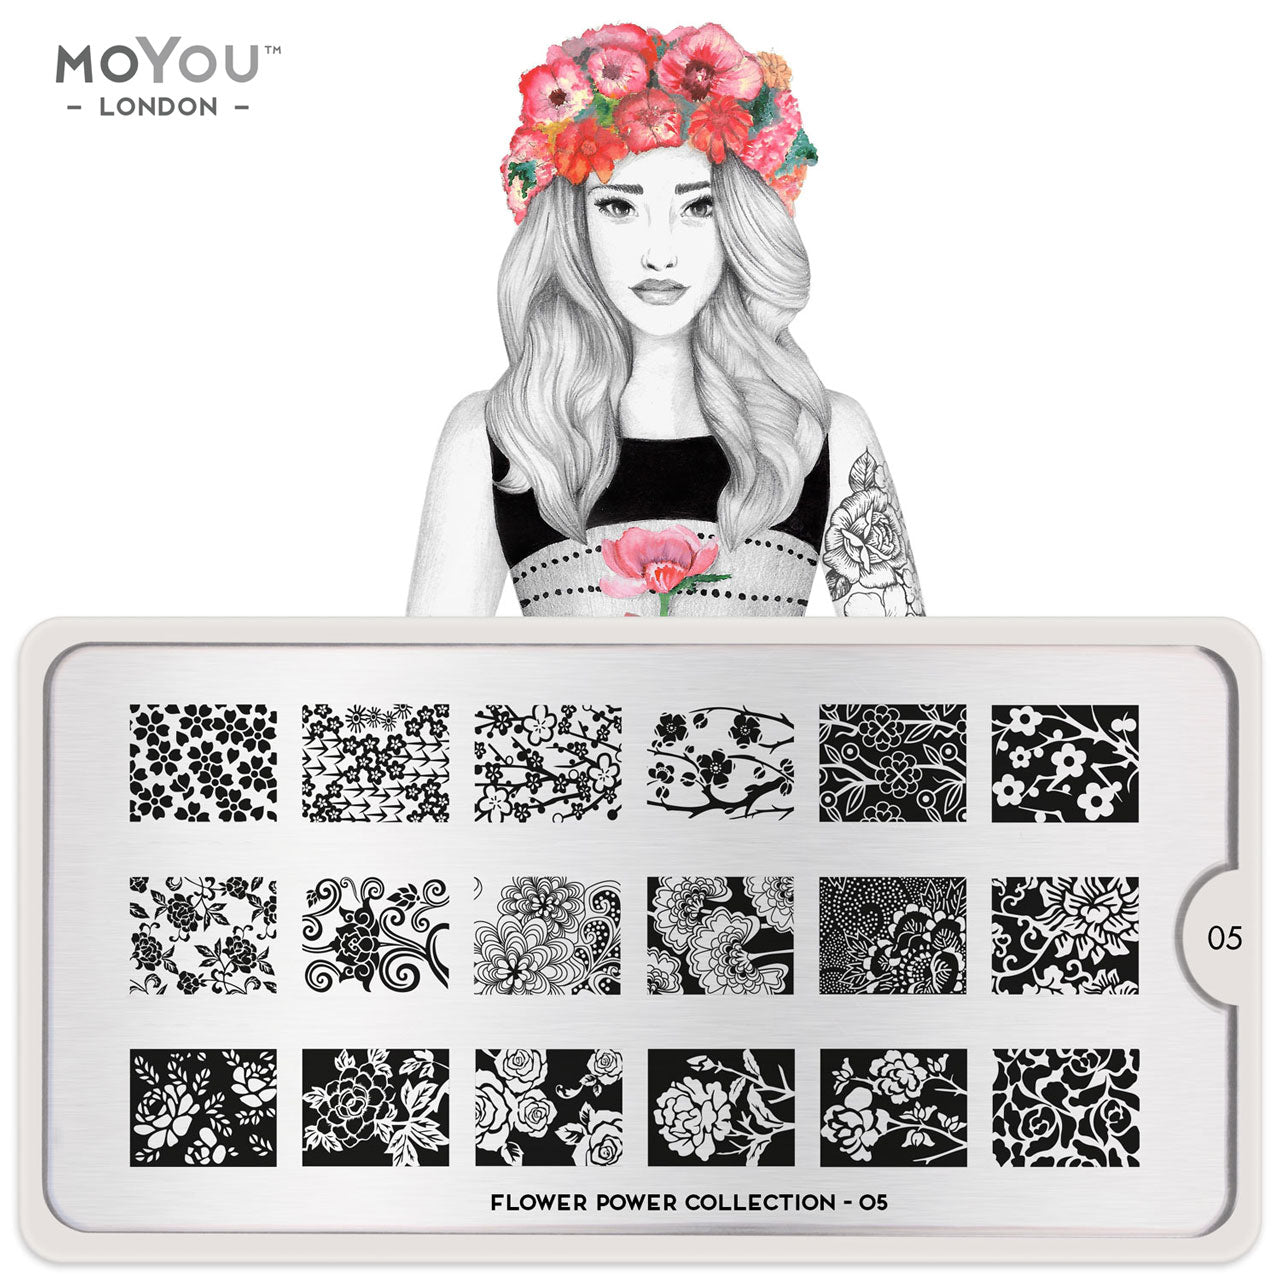 Plaque Stamping Flower Power 05 - MoYou London